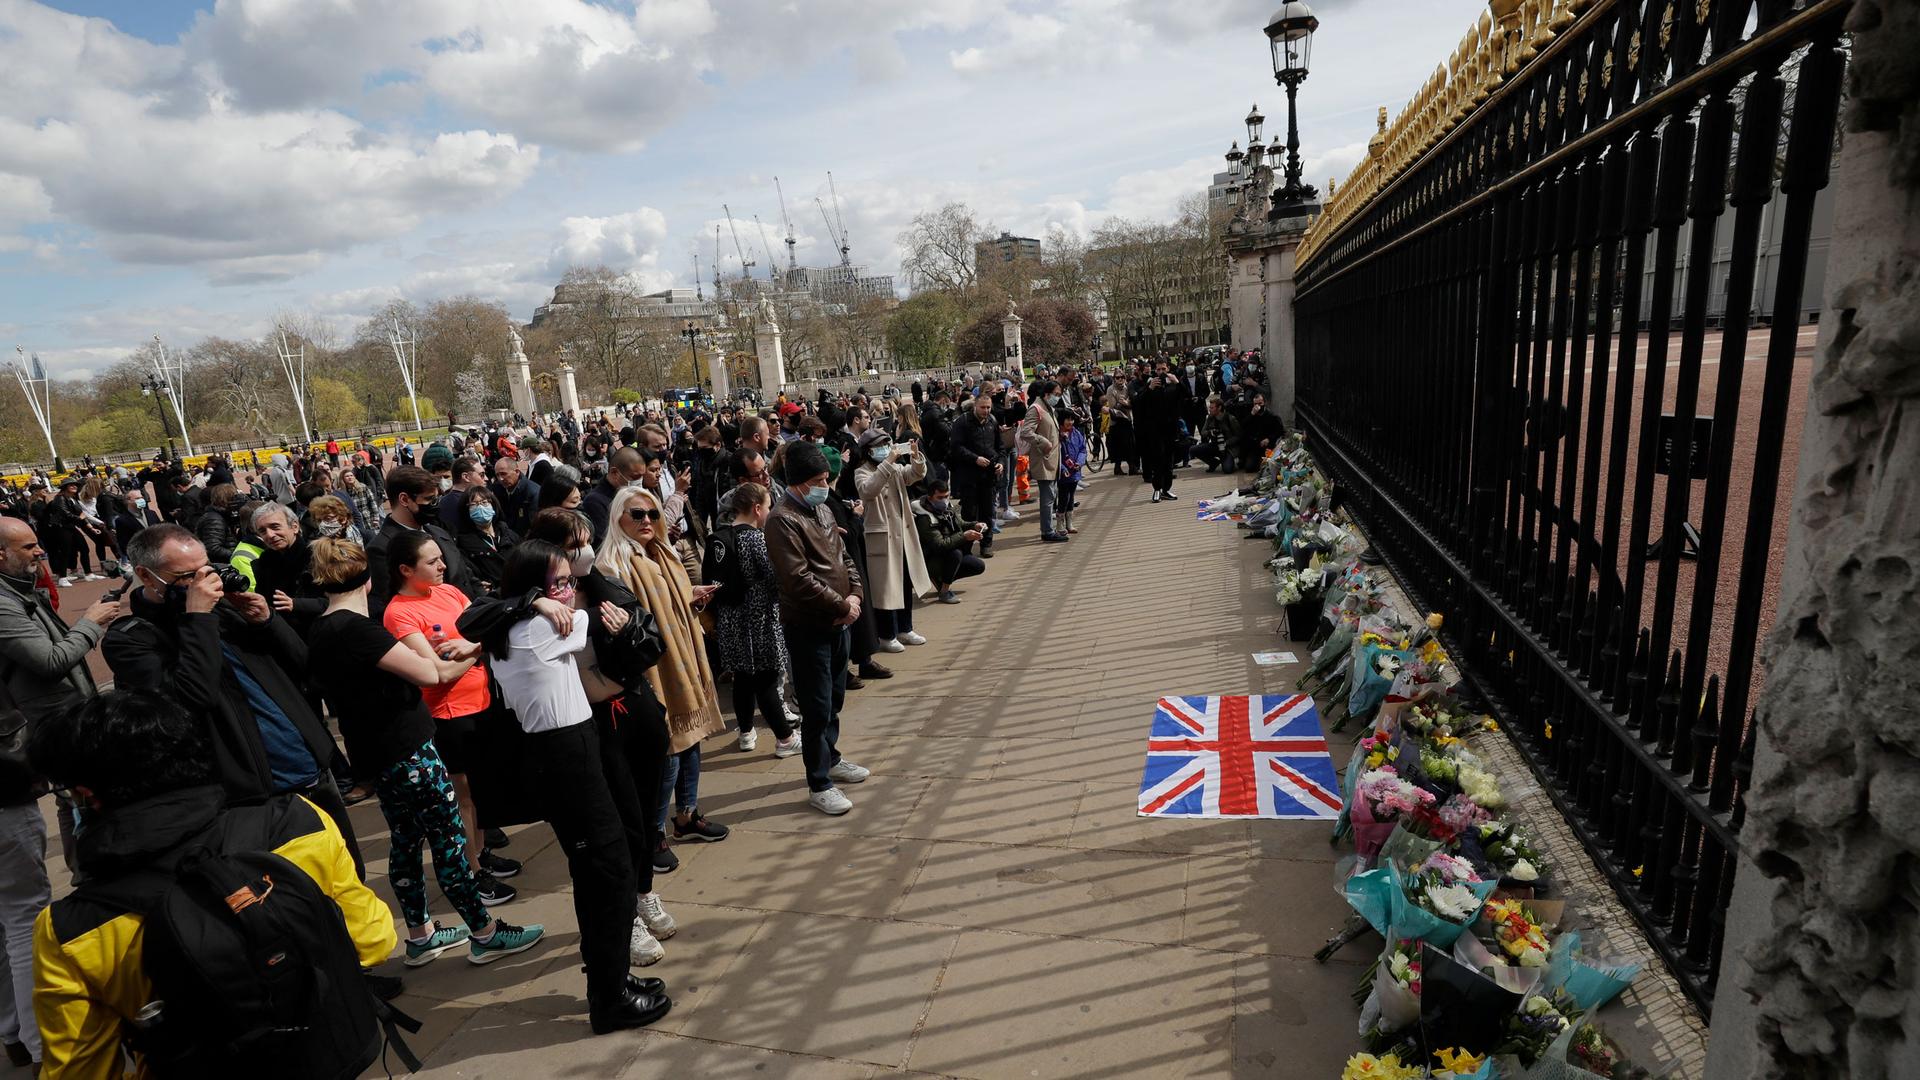 A large crowd of people are shown outside of the tall black iron gates of Buckingham Palace.